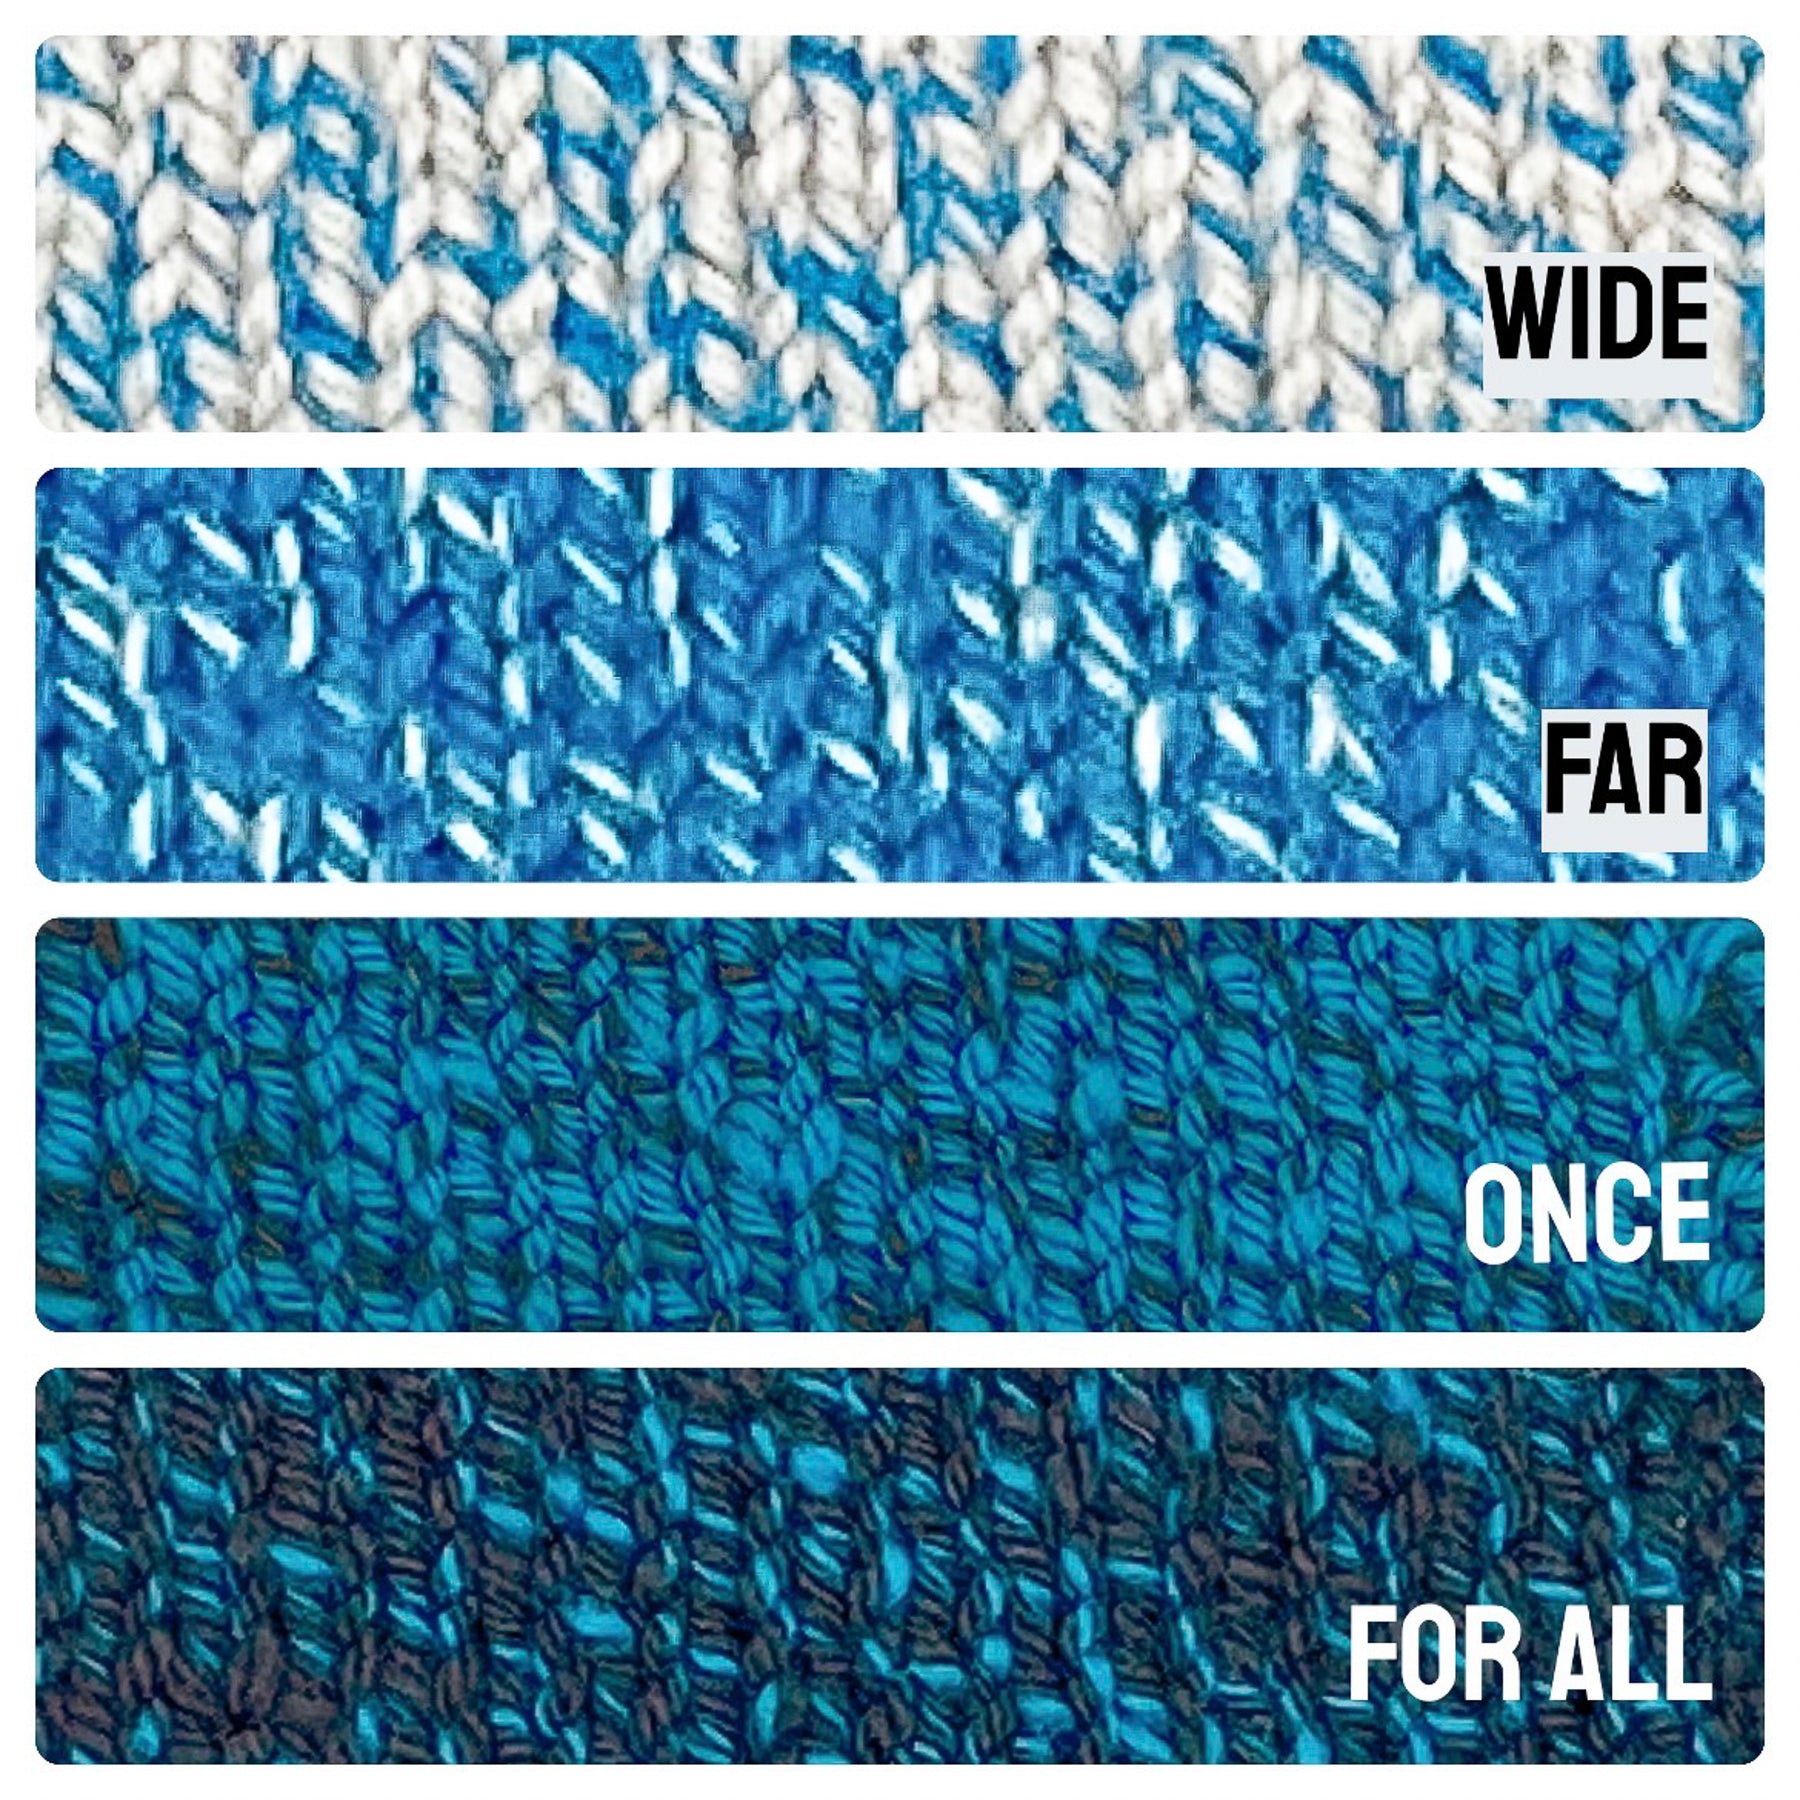 FAR AND WIDE SHAWL KIT